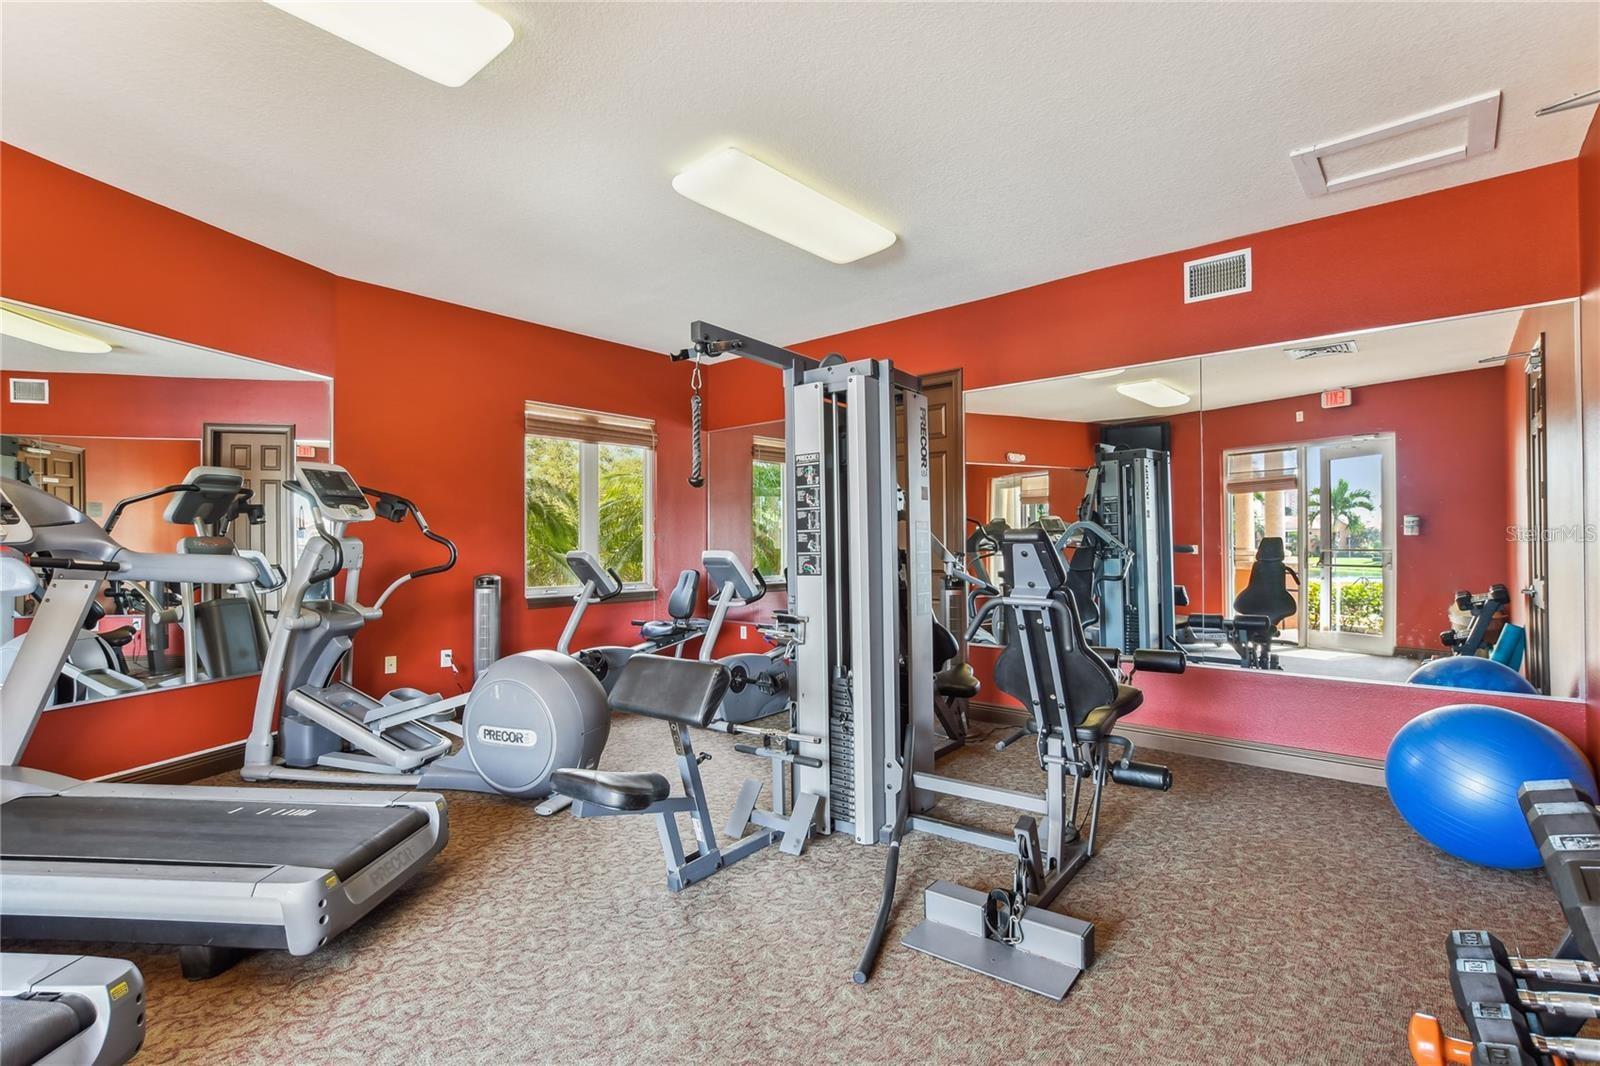 Fitness room with Precor equipment.